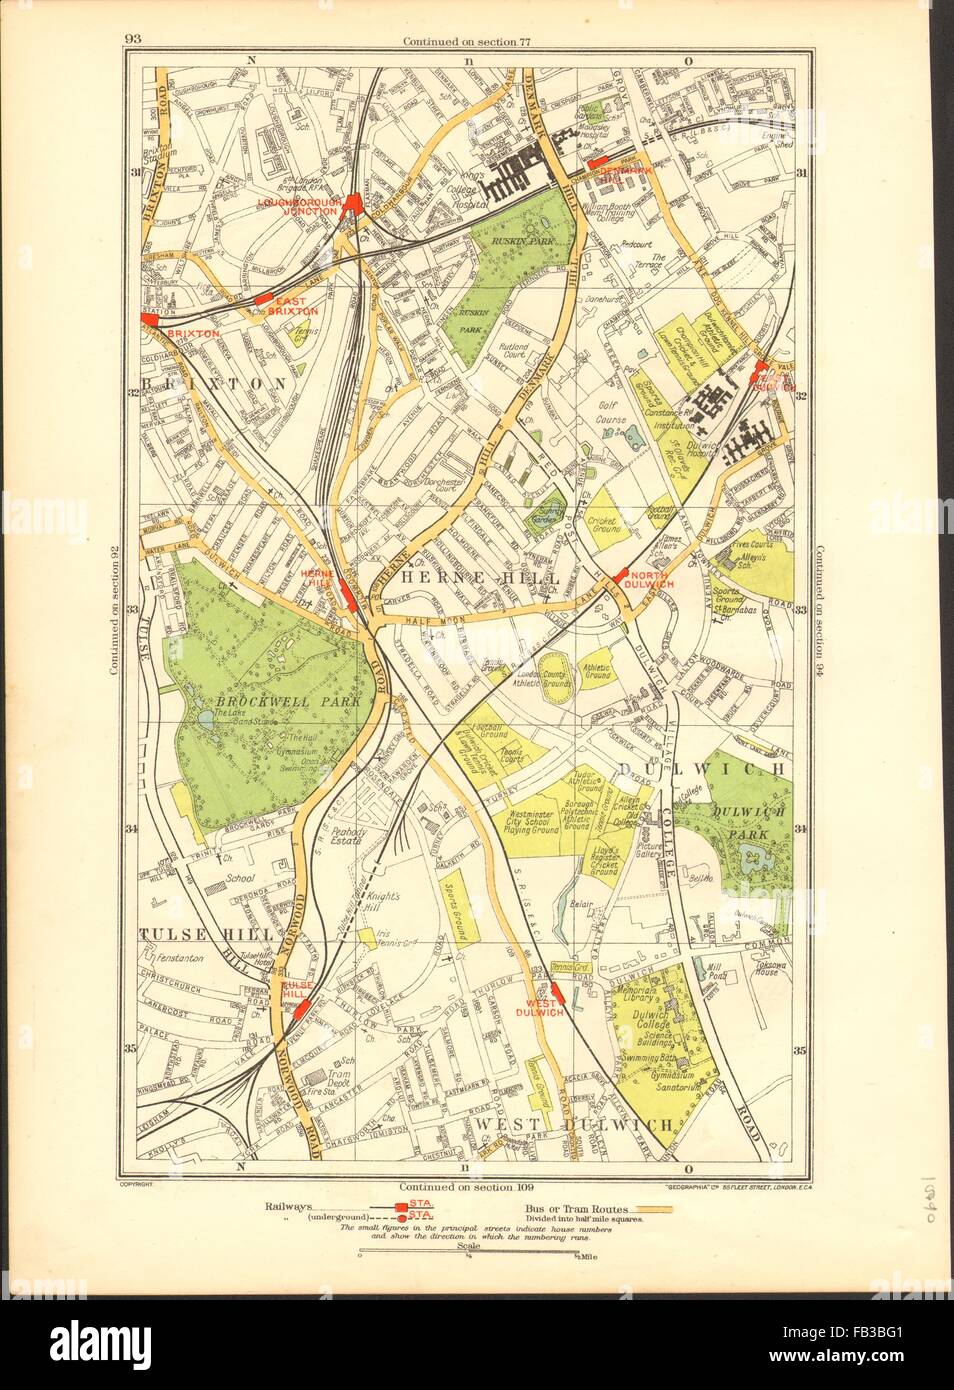 LONDON: Dulwich,Herne Hill,Tulse Hill,Brixton,Stockwell,Denmark Hill, 1937 map Stock Photo